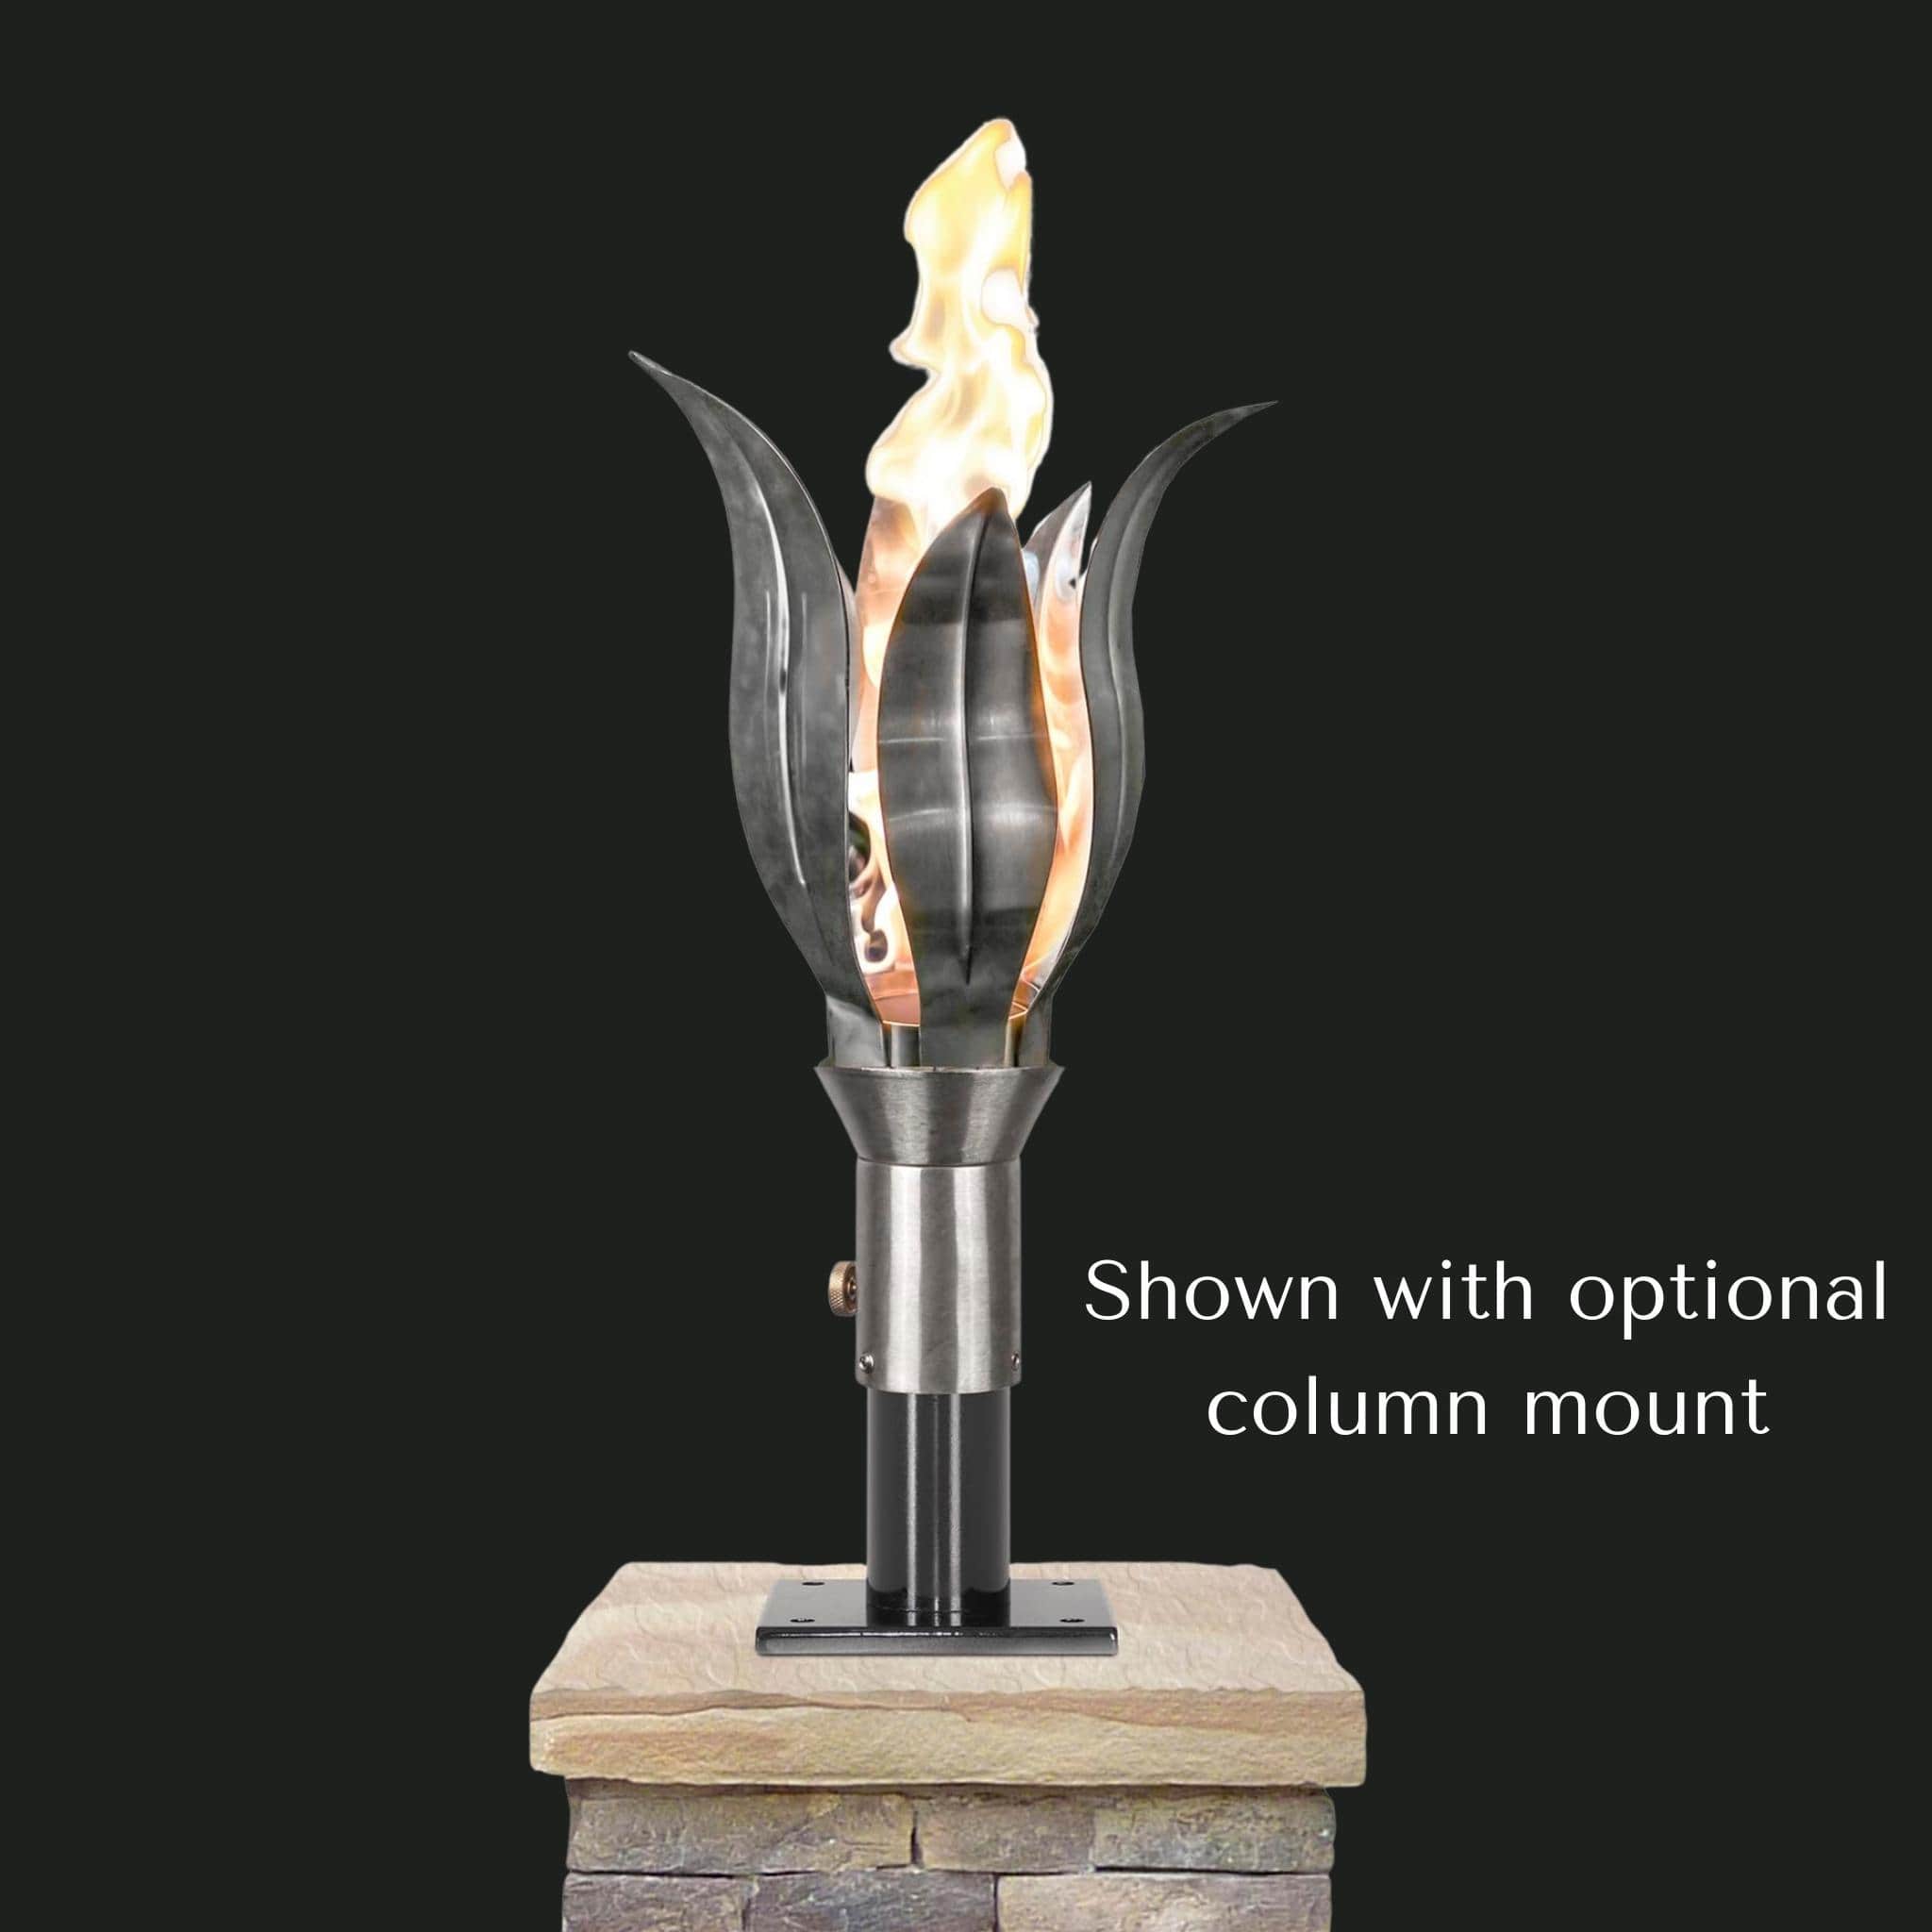 Flower Fire Torch COMPLETE KIT - Stainless Steel - The Outdoor Plus